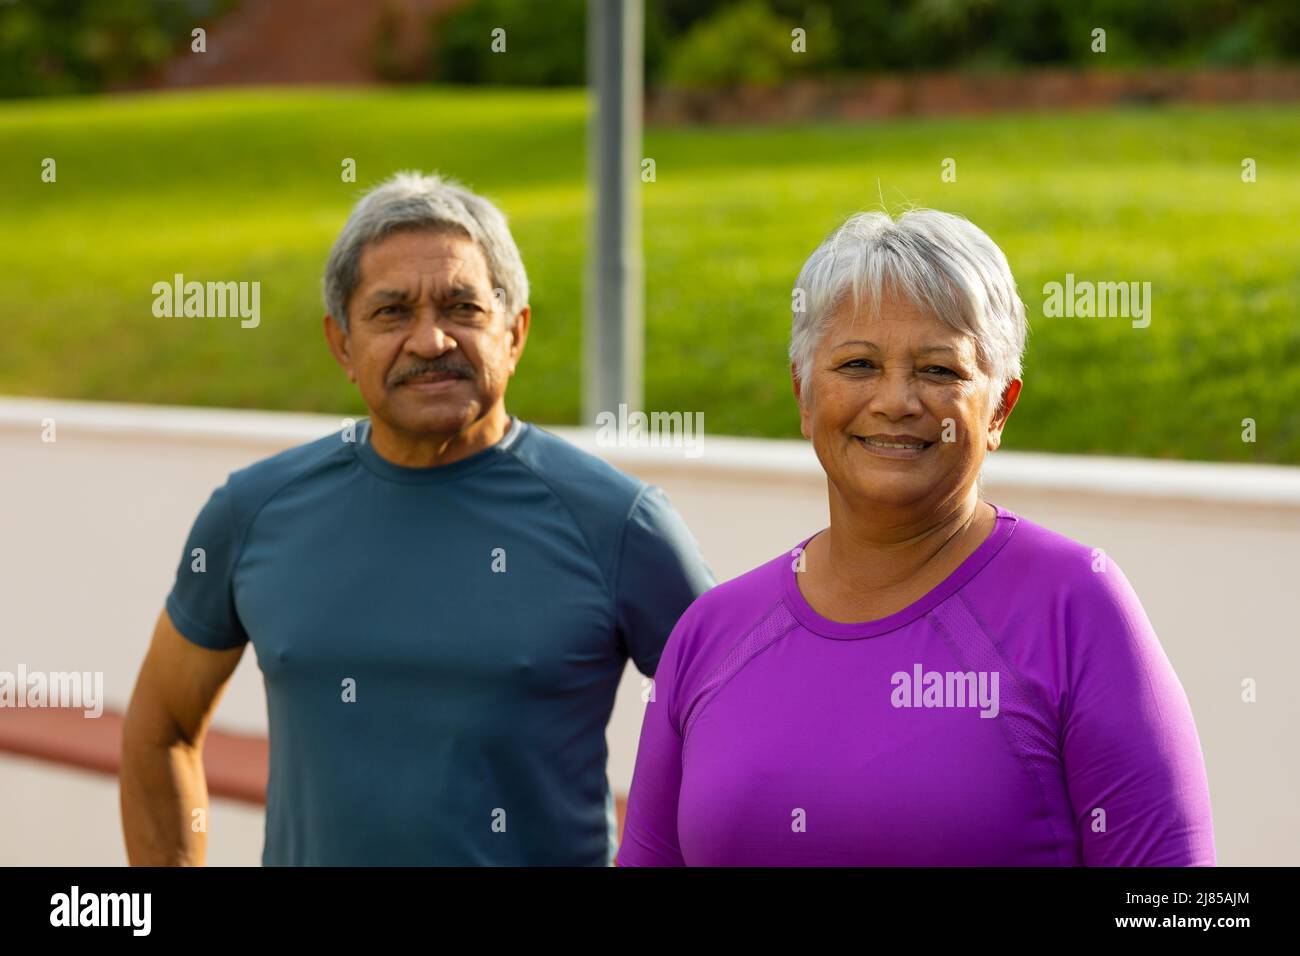 Portrait of biracial senior woman and man wearing sports clothing standing in tennis court Stock Photo